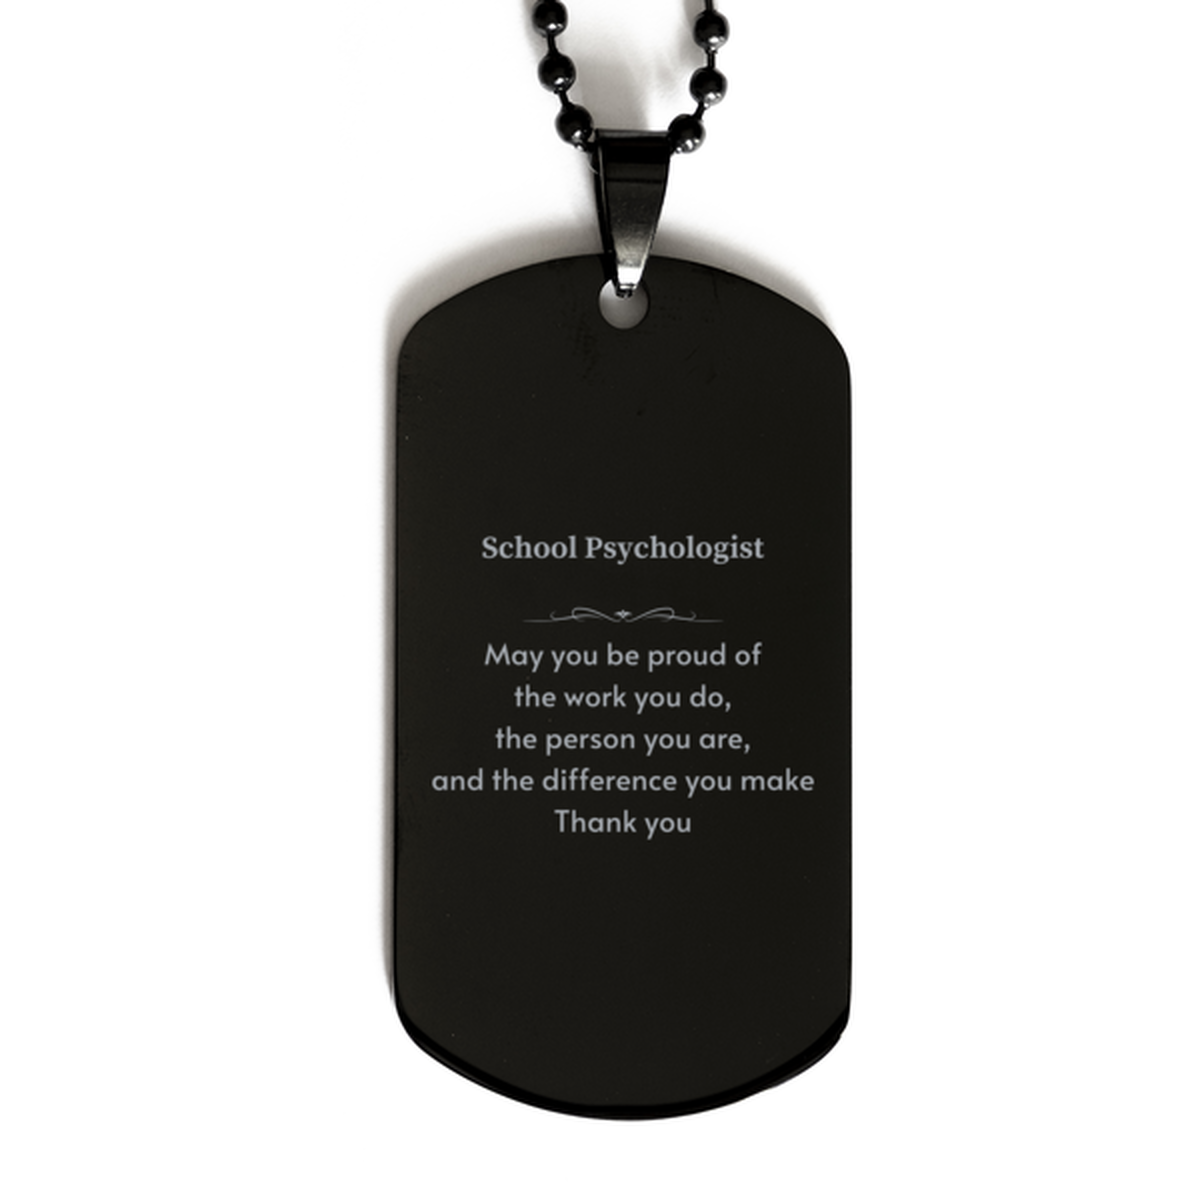 Heartwarming Black Dog Tag Retirement Coworkers Gifts for School Psychologist, School Psychologist May You be proud of the work you do, the person you are Gifts for Boss Men Women Friends